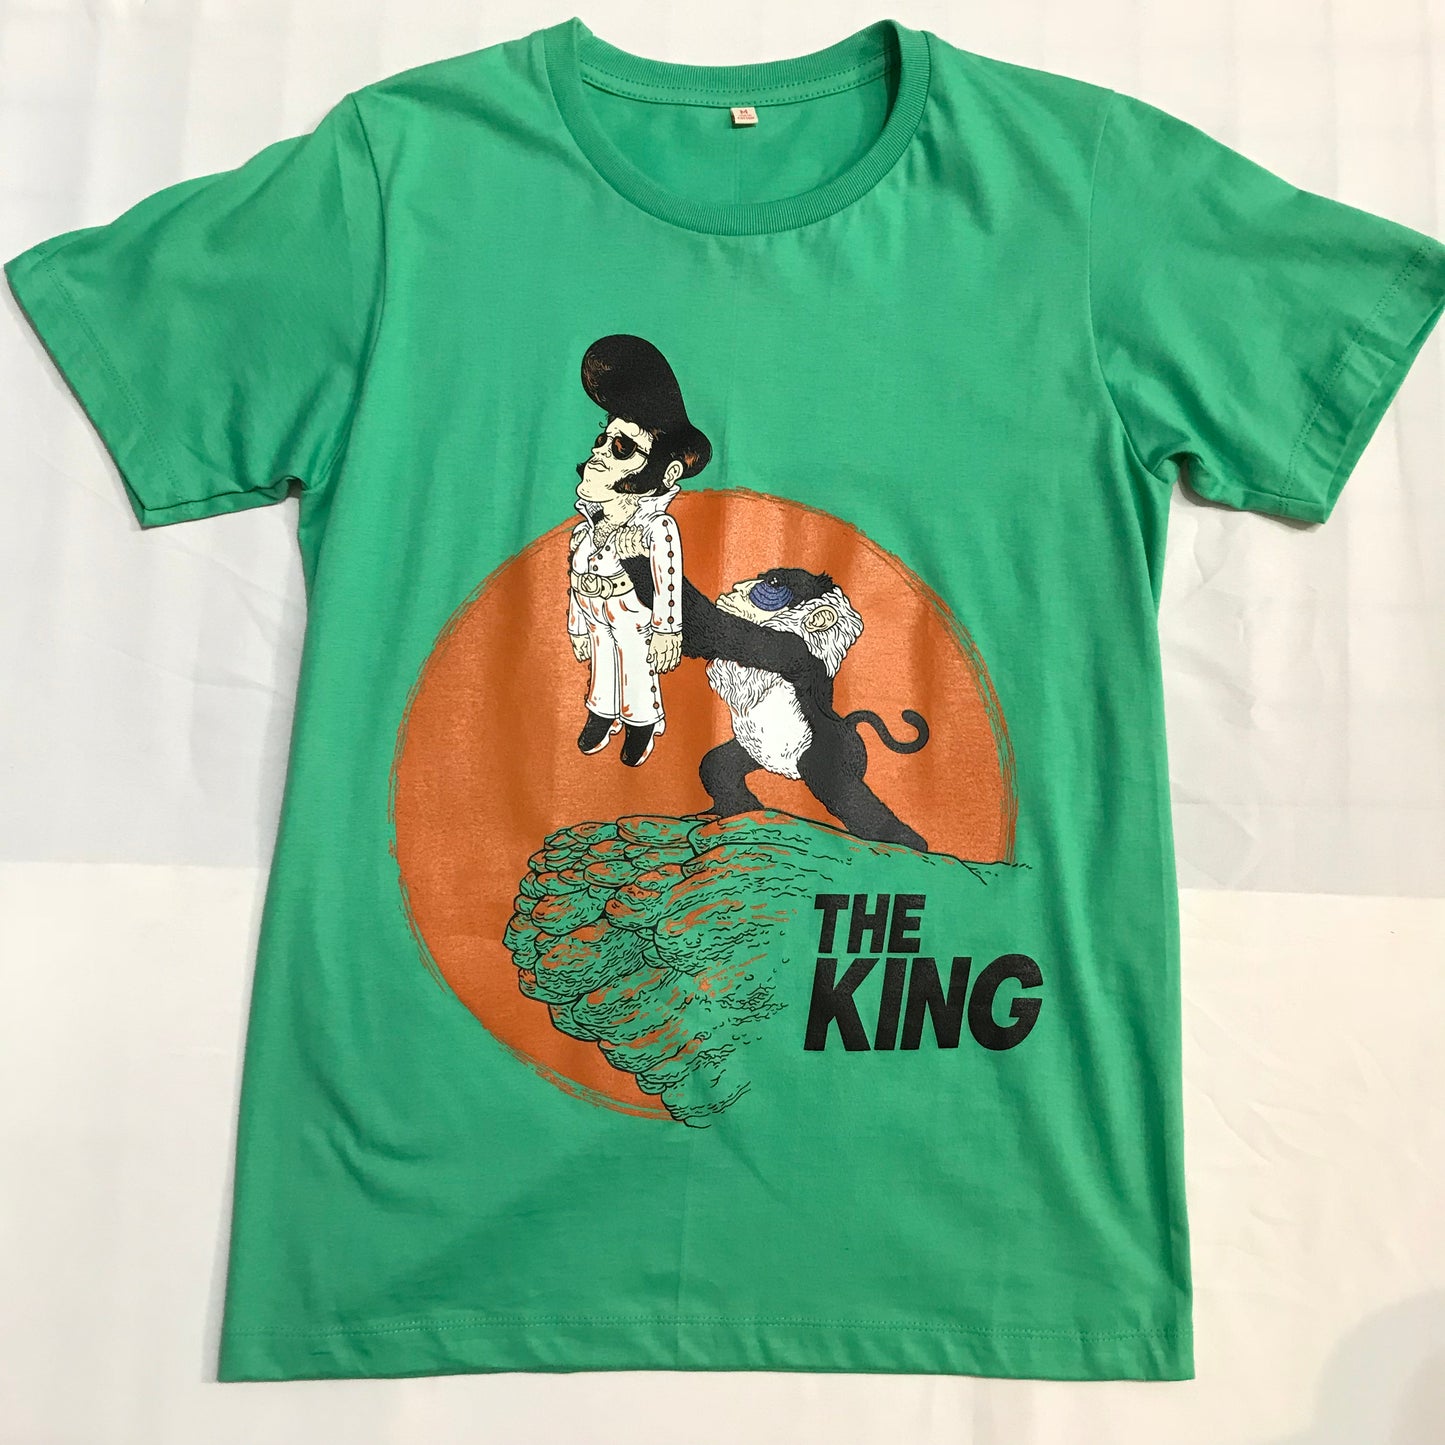 The King - green